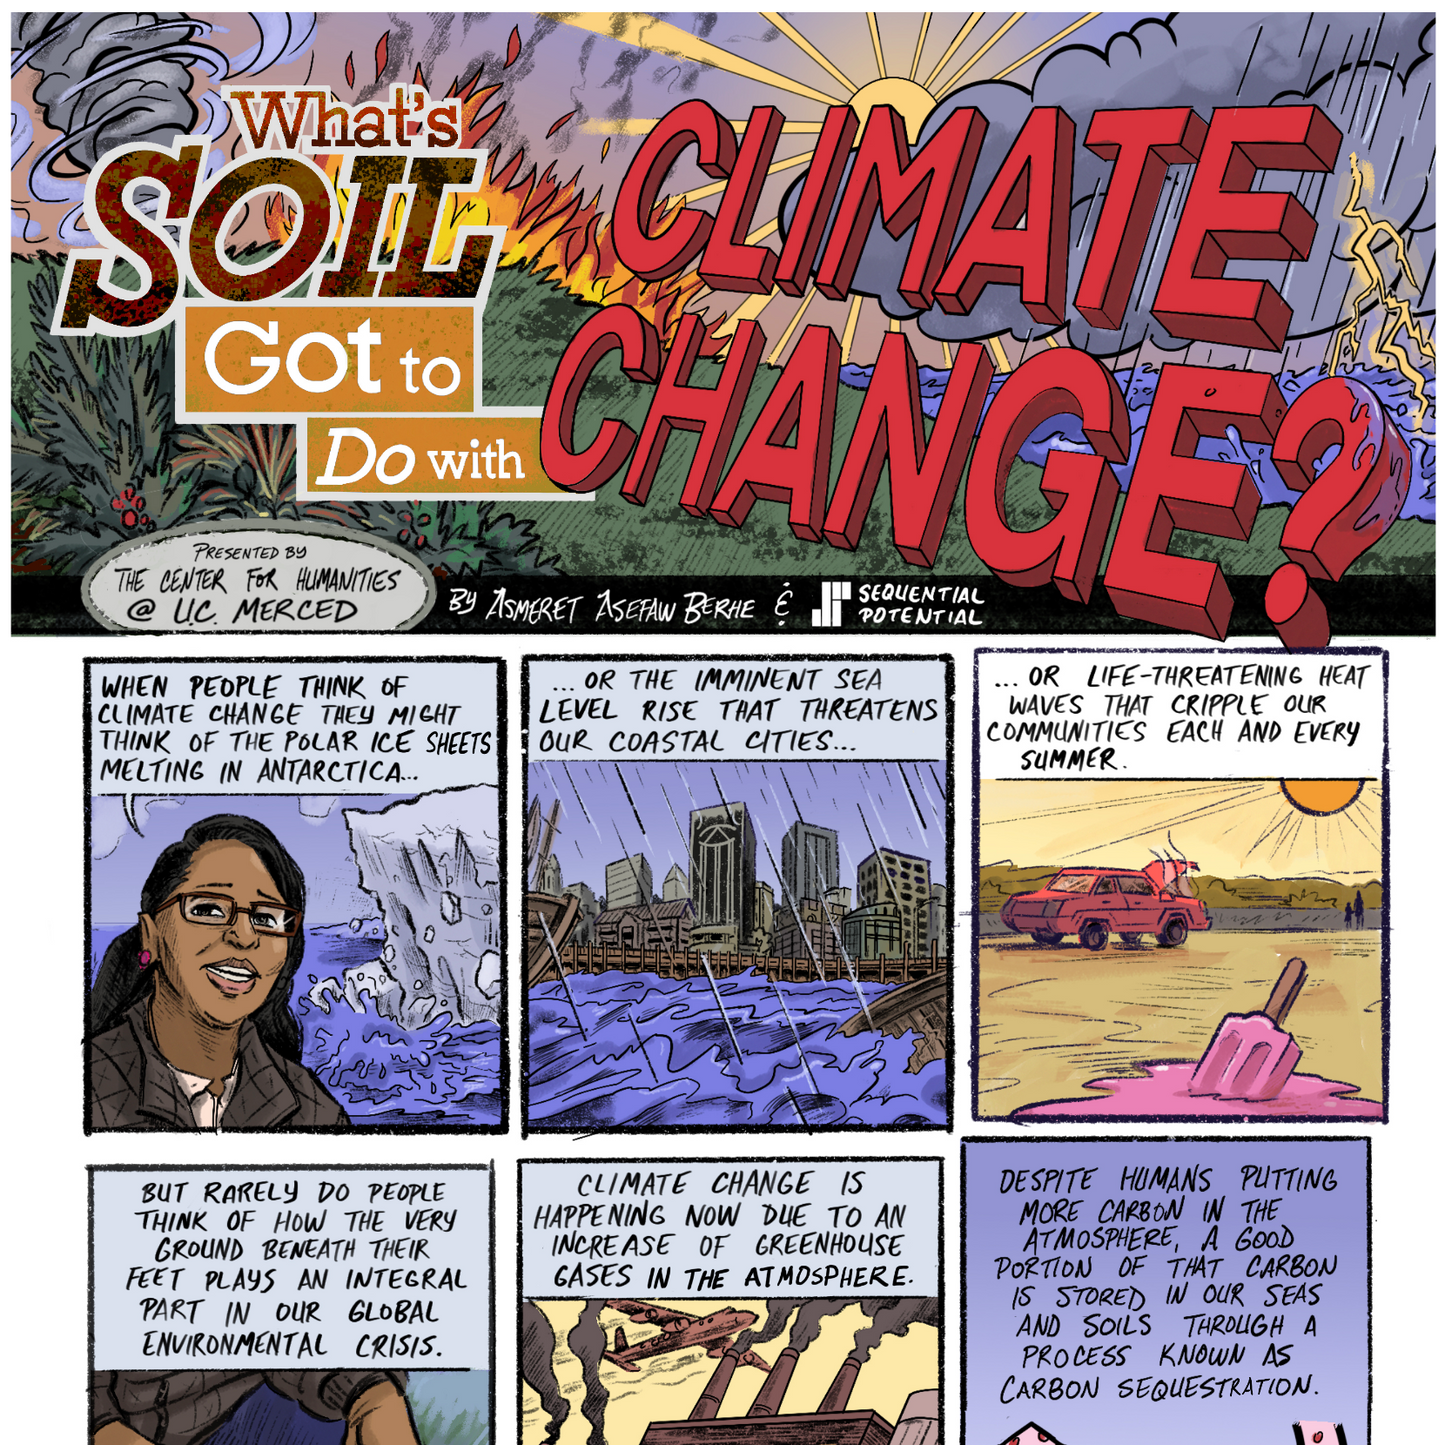 Book - What's Soil got to do with Climate Change?